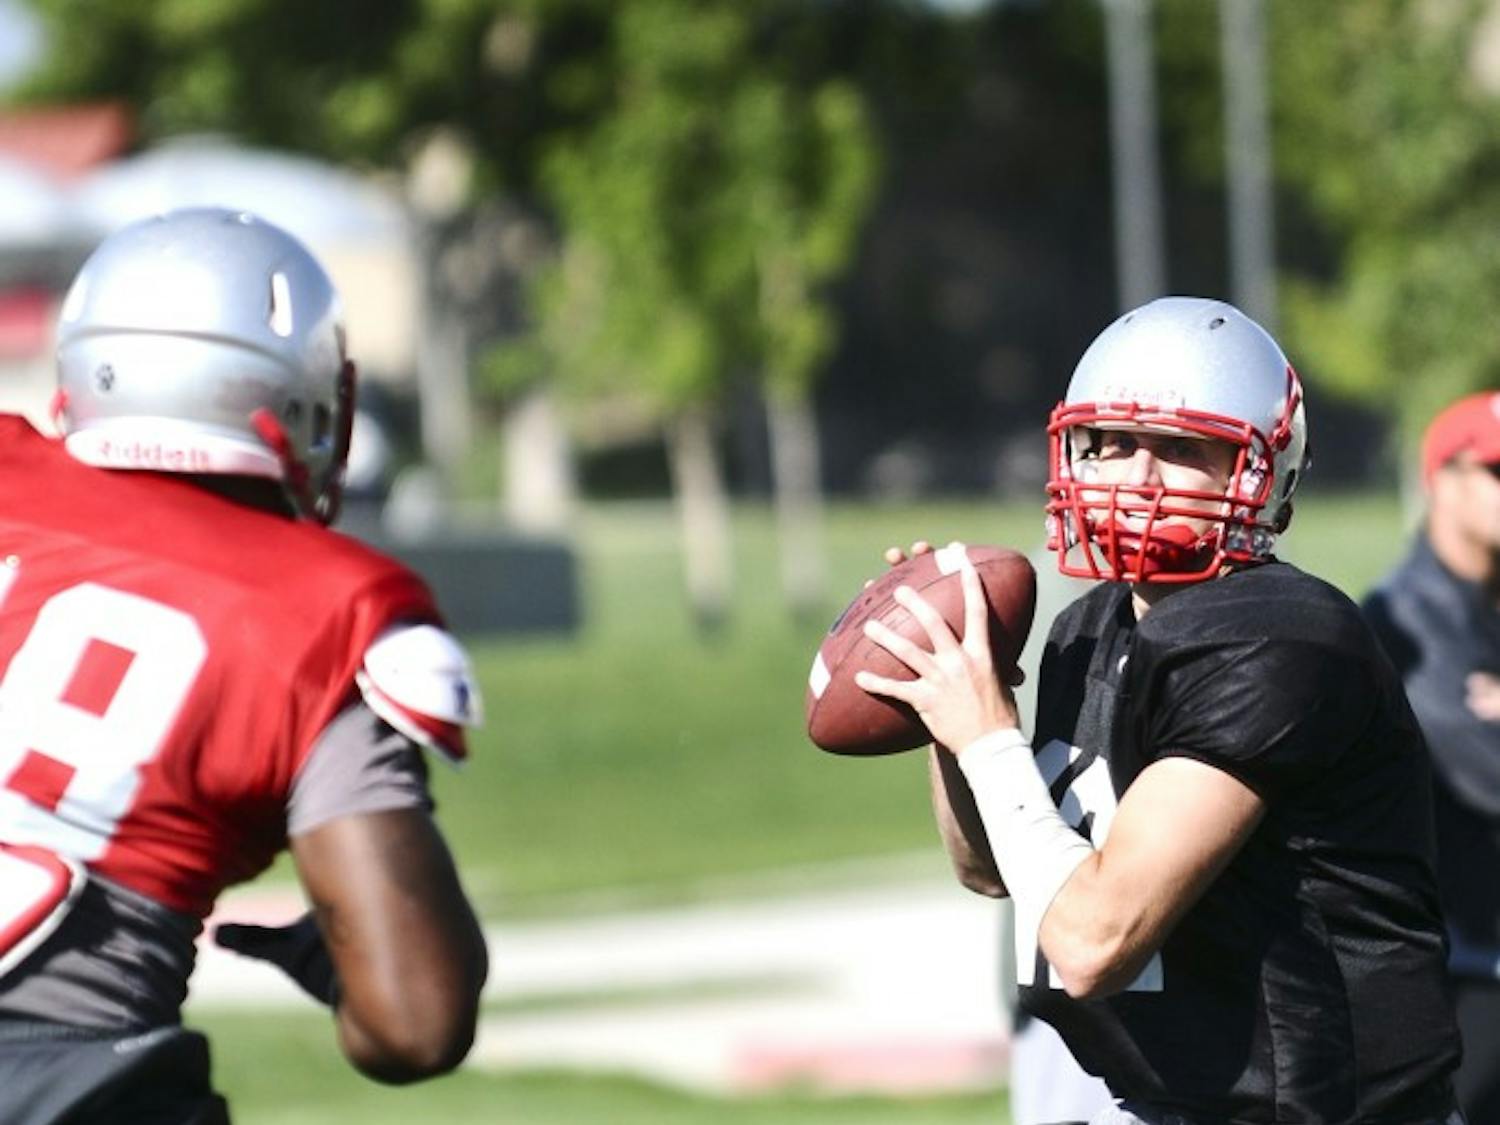 	B.R. Holbrook leans back before a pass at practice Tuesday. Holbrook will start as quarterback during the Lobos first game at Oregon.